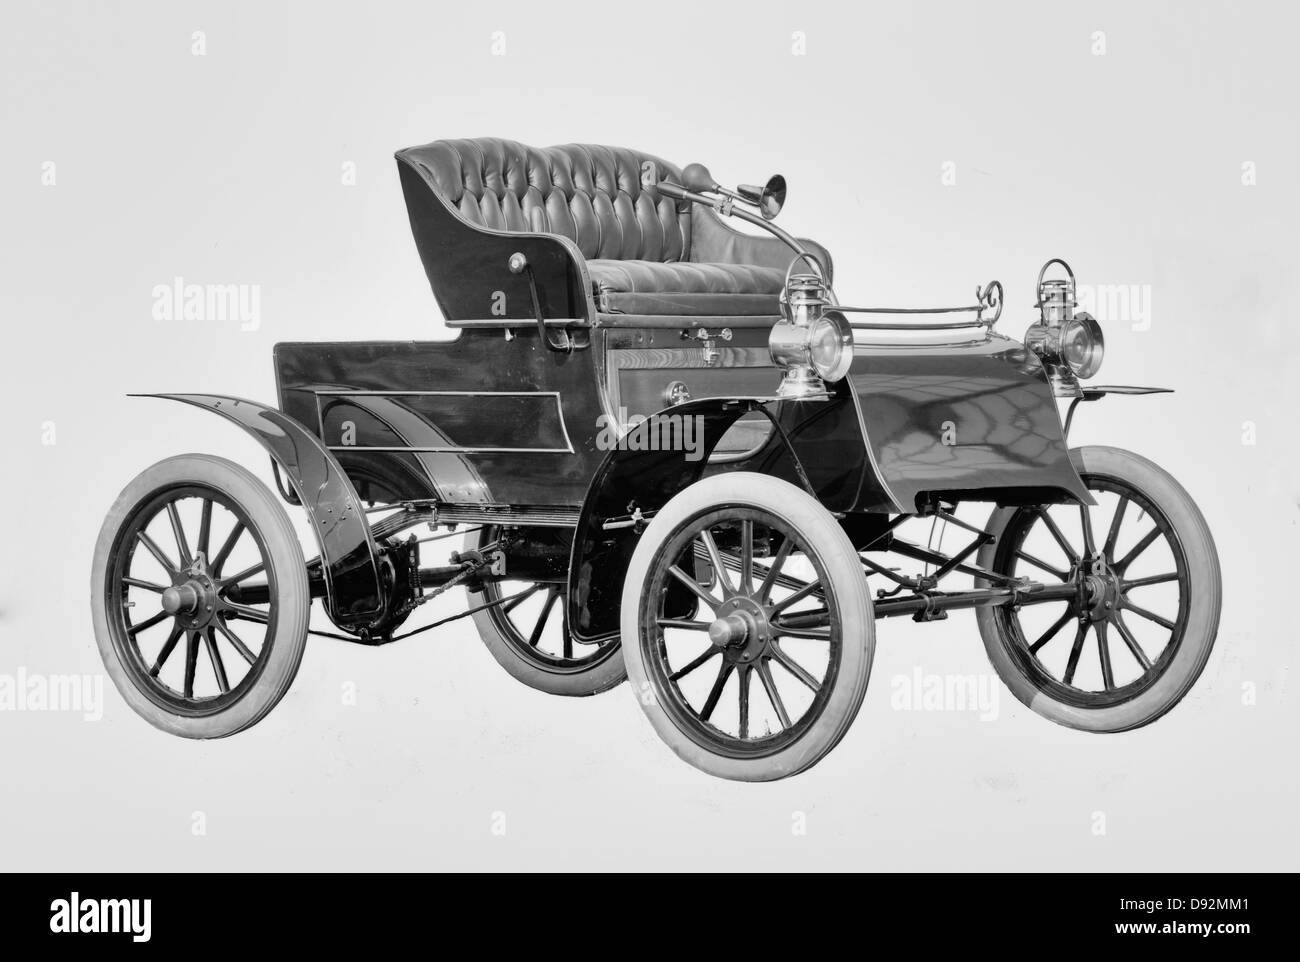 Northern automobile, front quarter view without top, circa 1910 Stock Photo